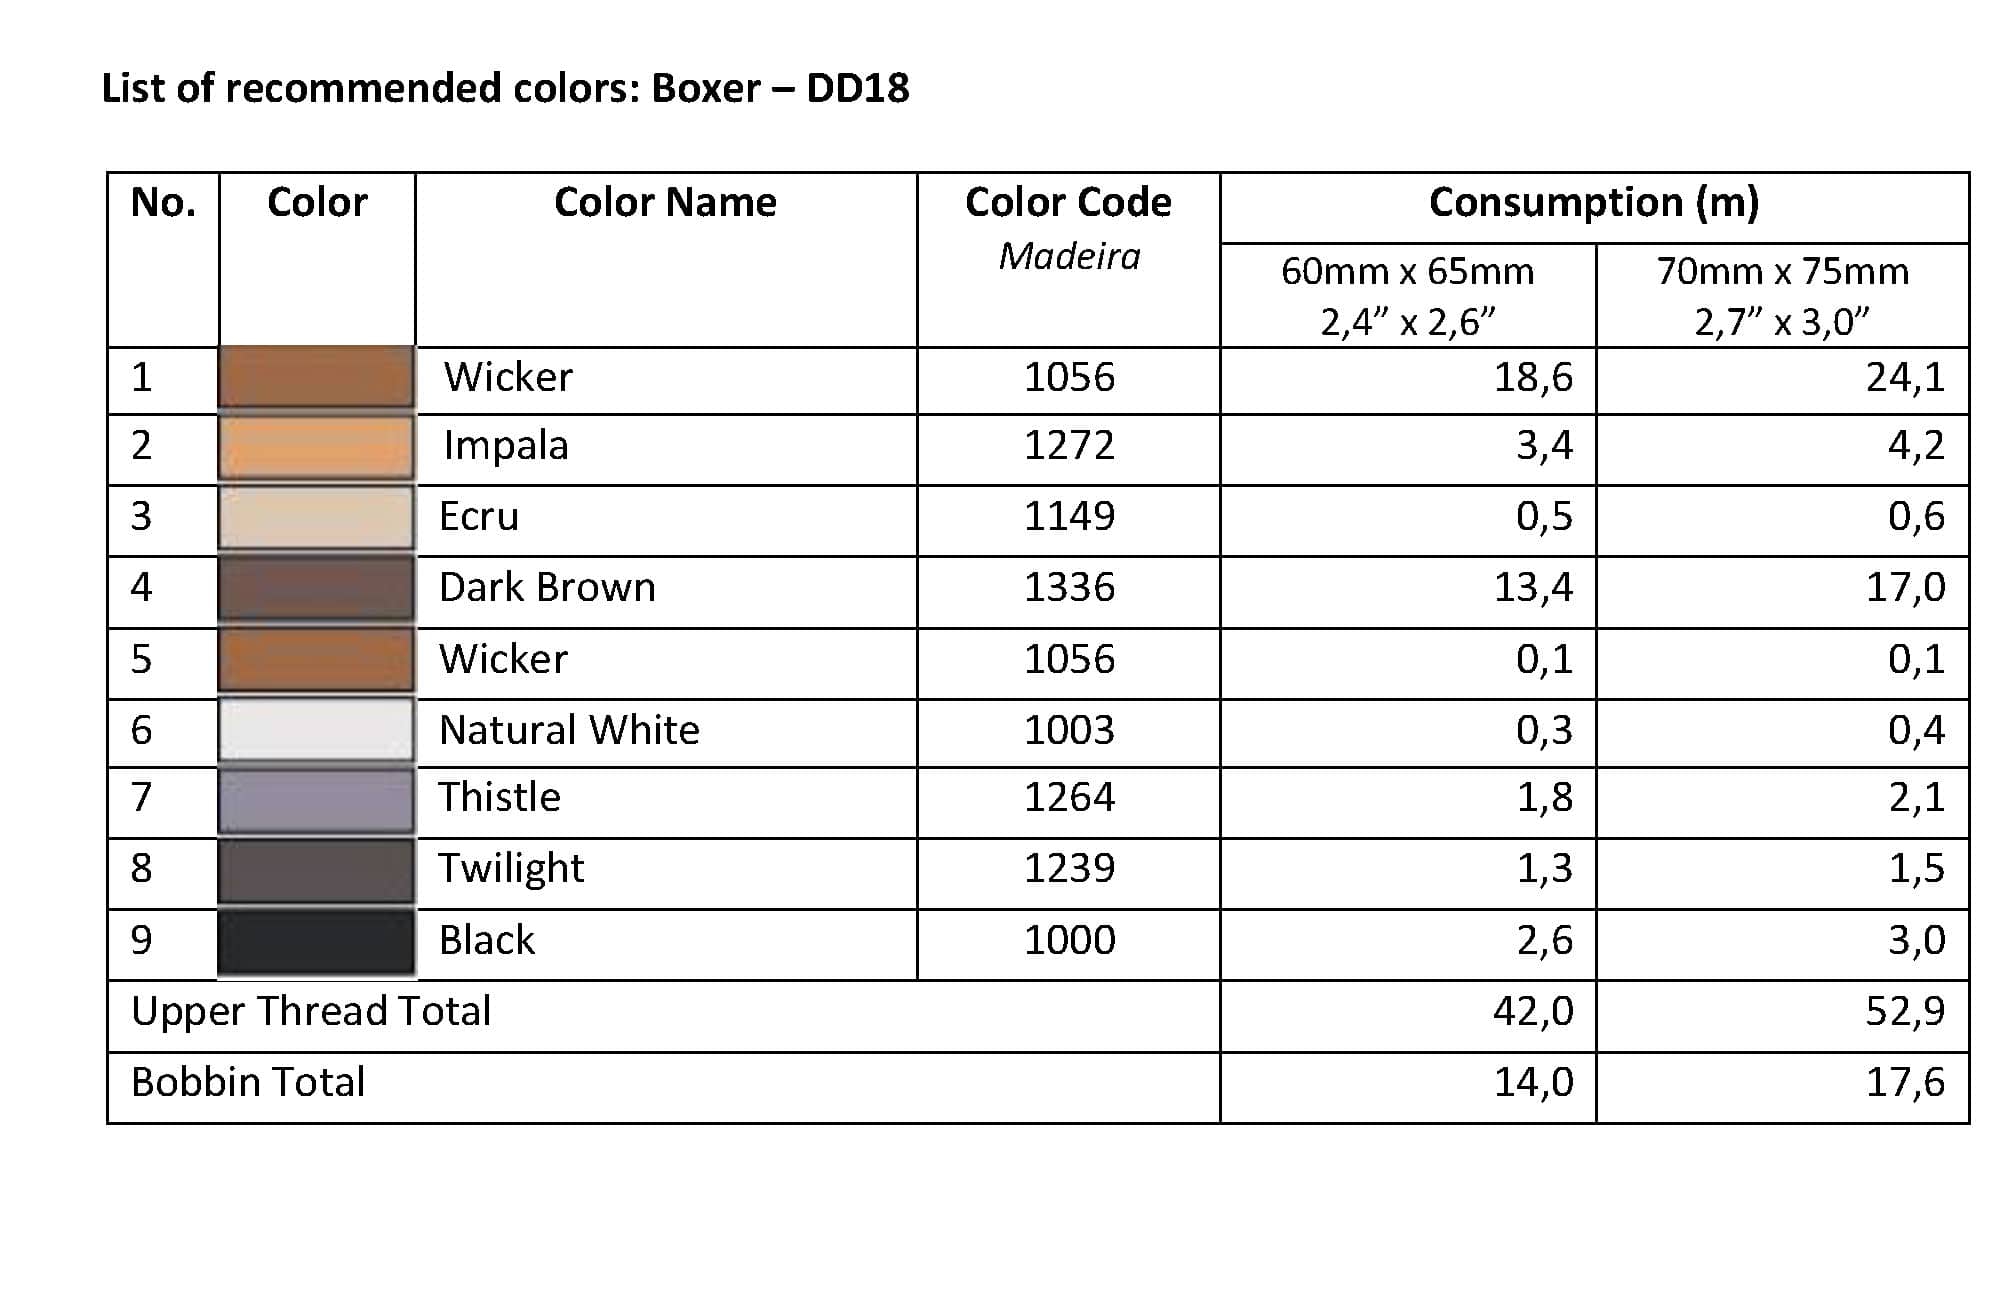 List of Recommended Colors - Boxer DD18